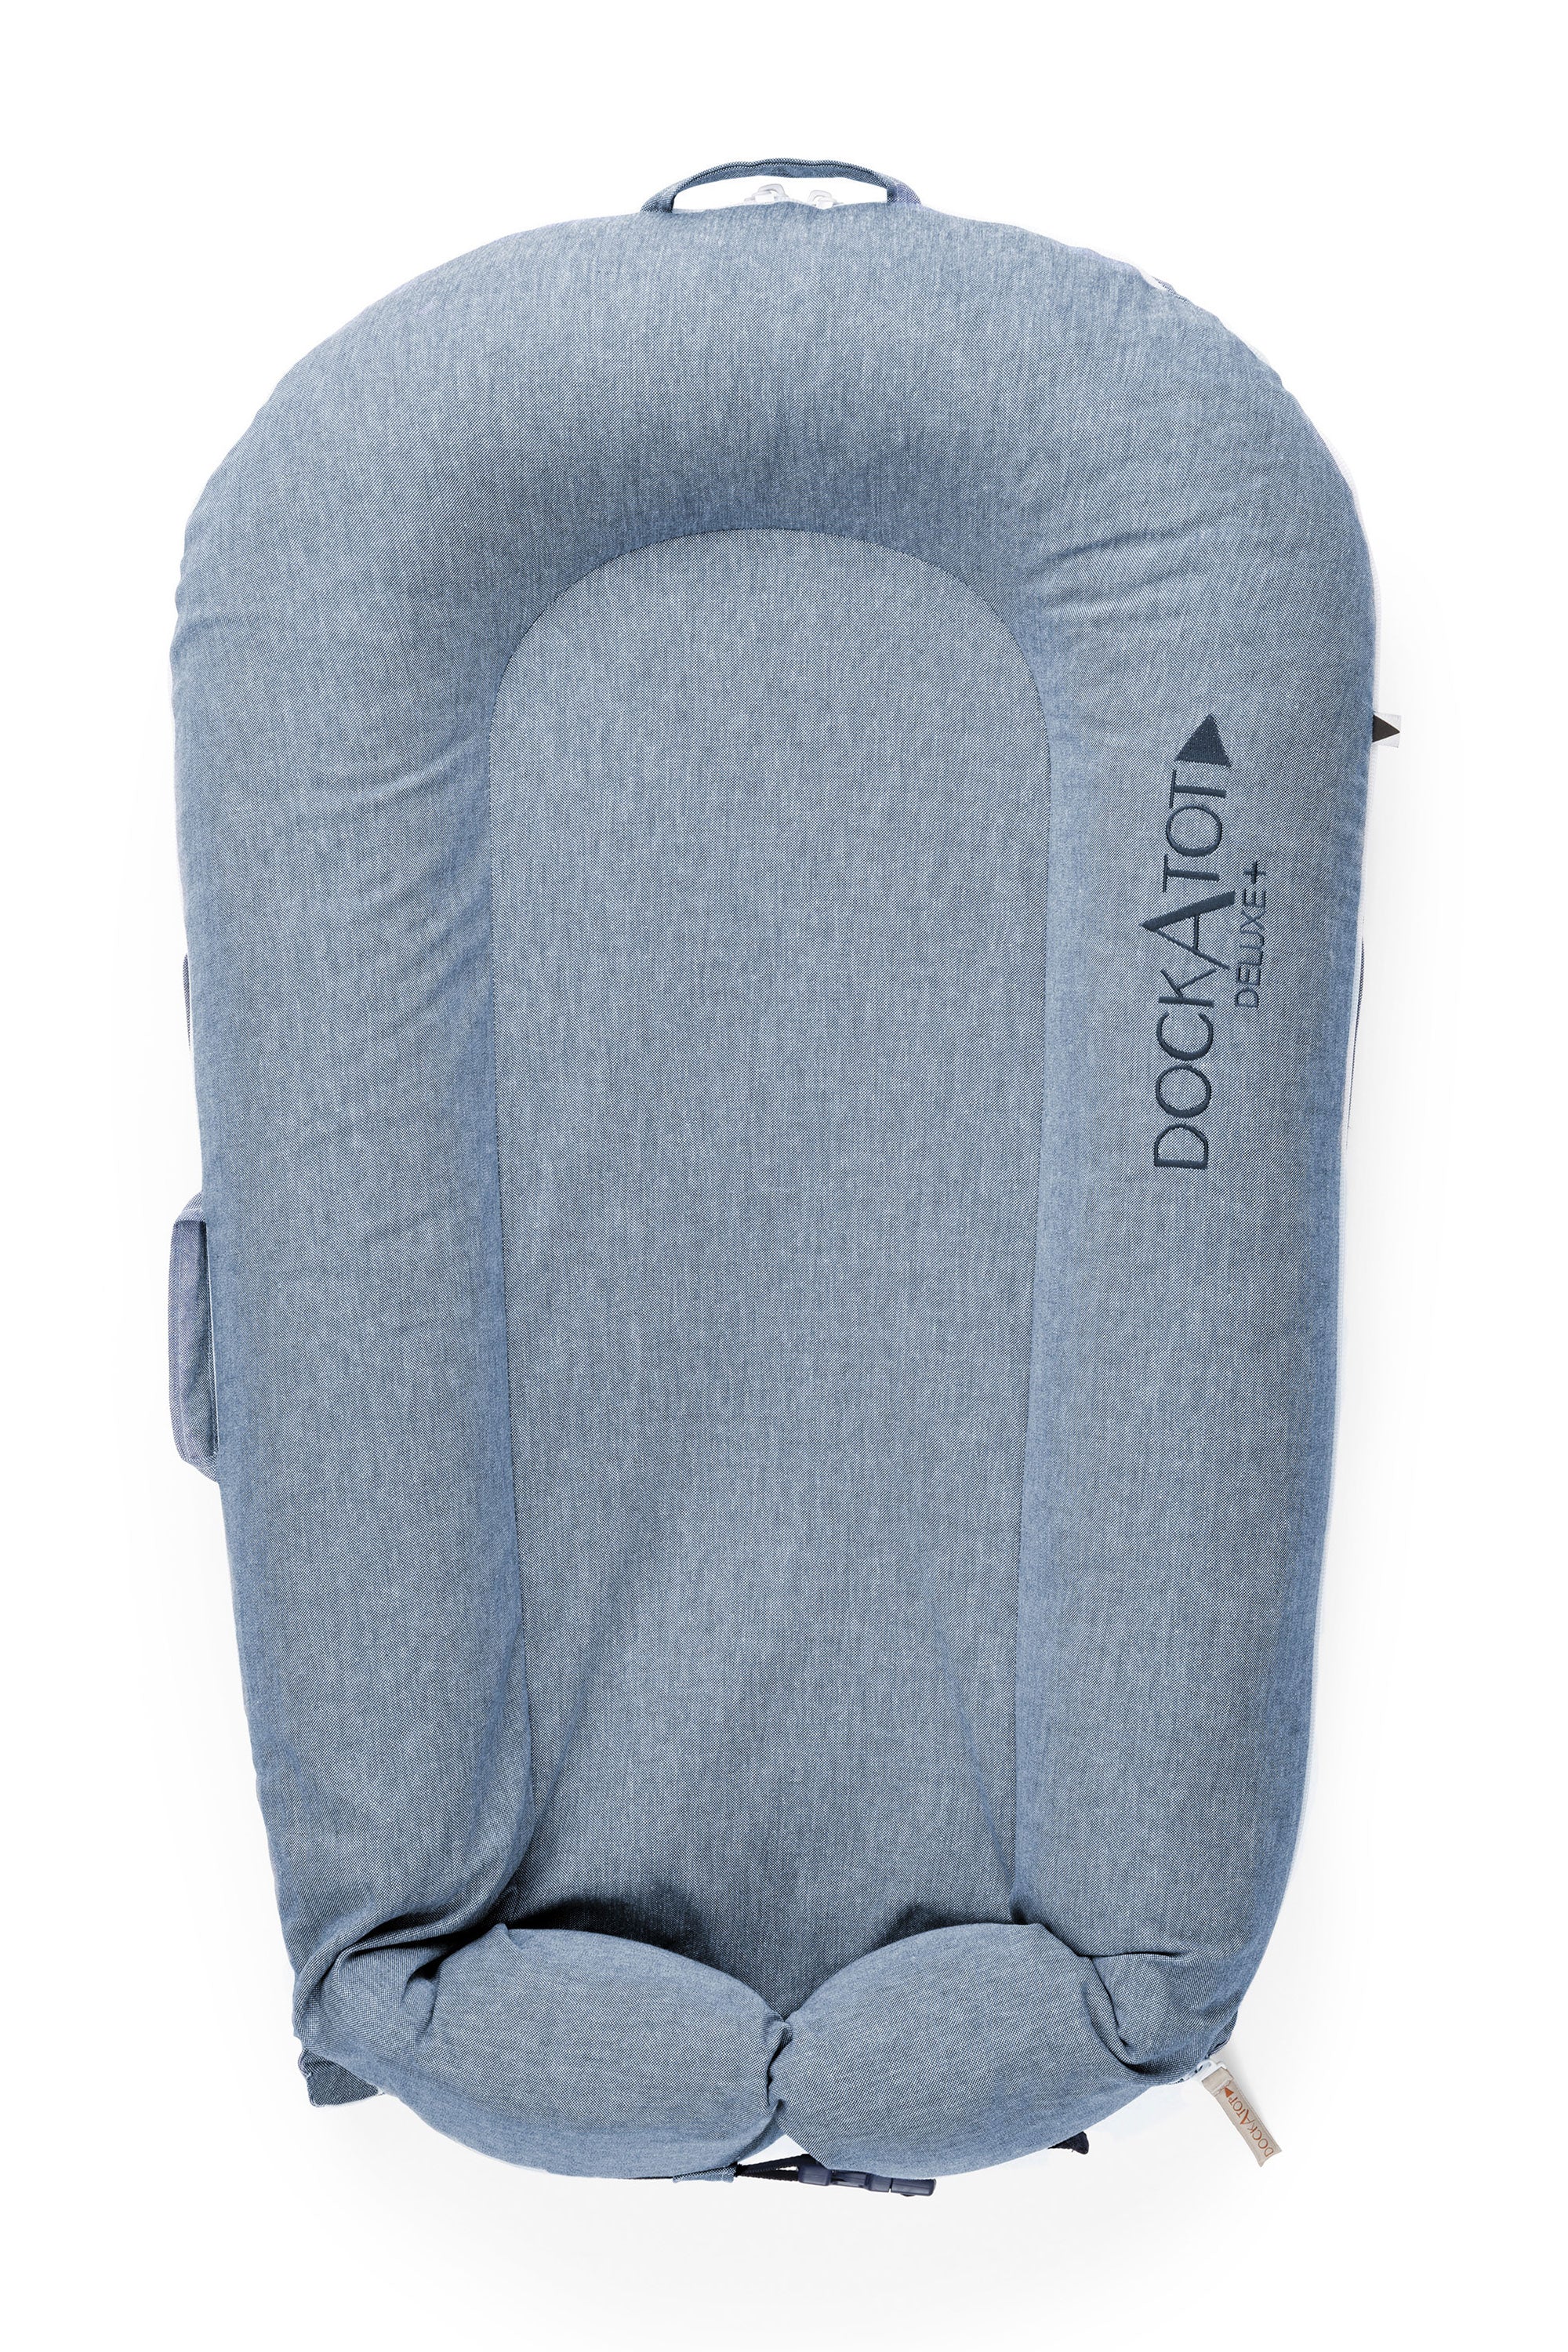 A blue DockATot LAST CHANCE: Deluxe+ Dock - Indigo Chambray baby lounger isolated on a white background. The lounger has a cushioned, oval shape with side handles and prominently displays the &quot;DockATot&quot; logo.